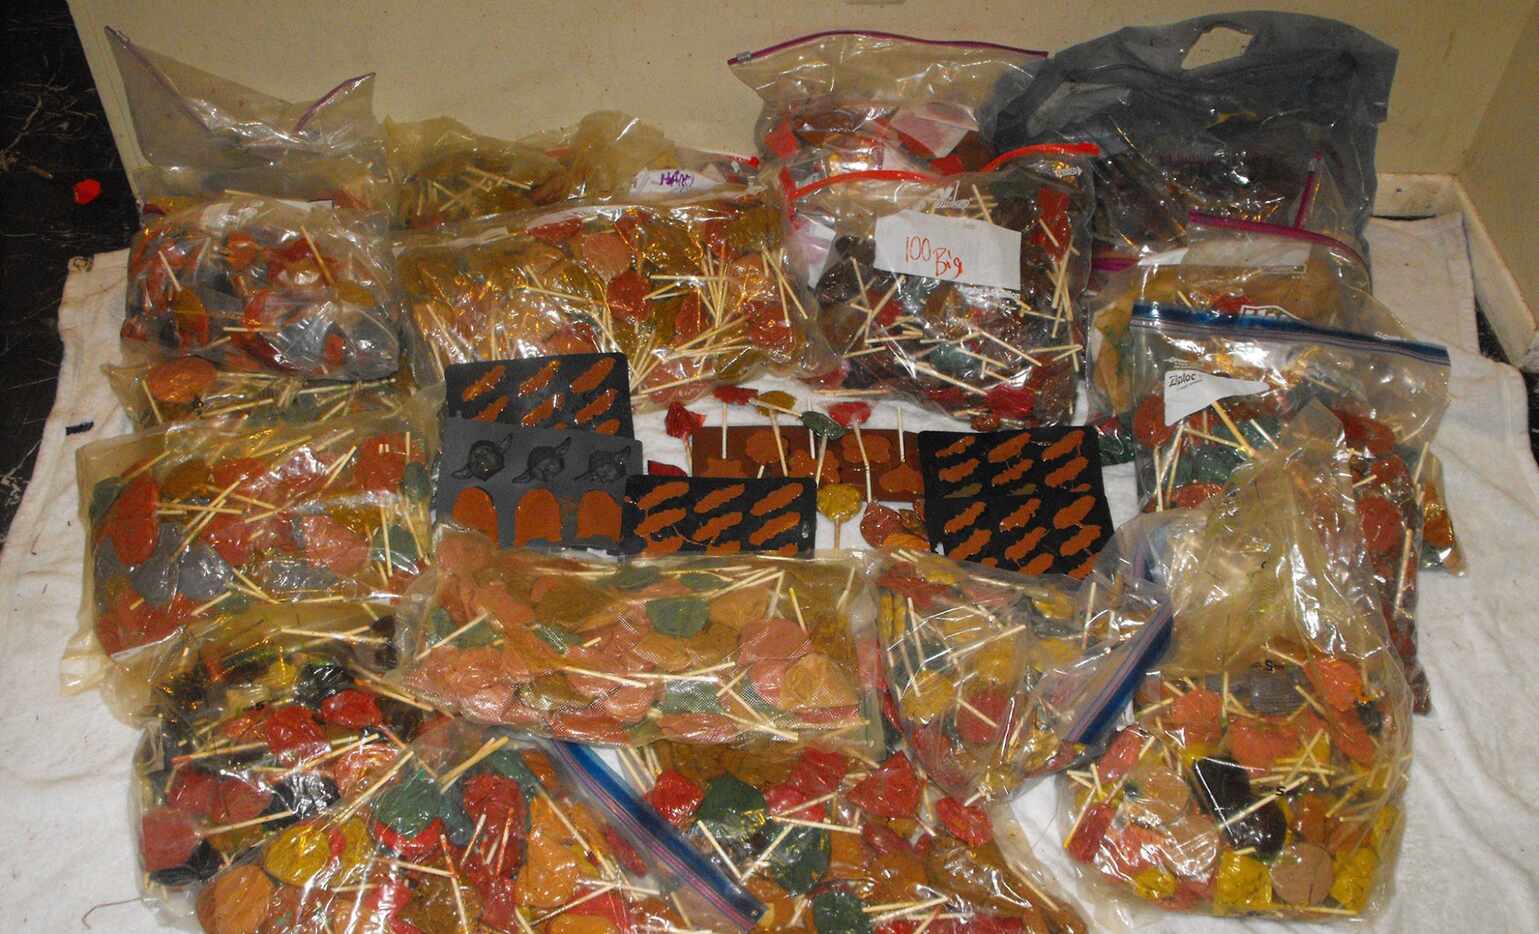 Nearly $1 million worth of meth lollipops were found in a home in Spring, near Houston on...